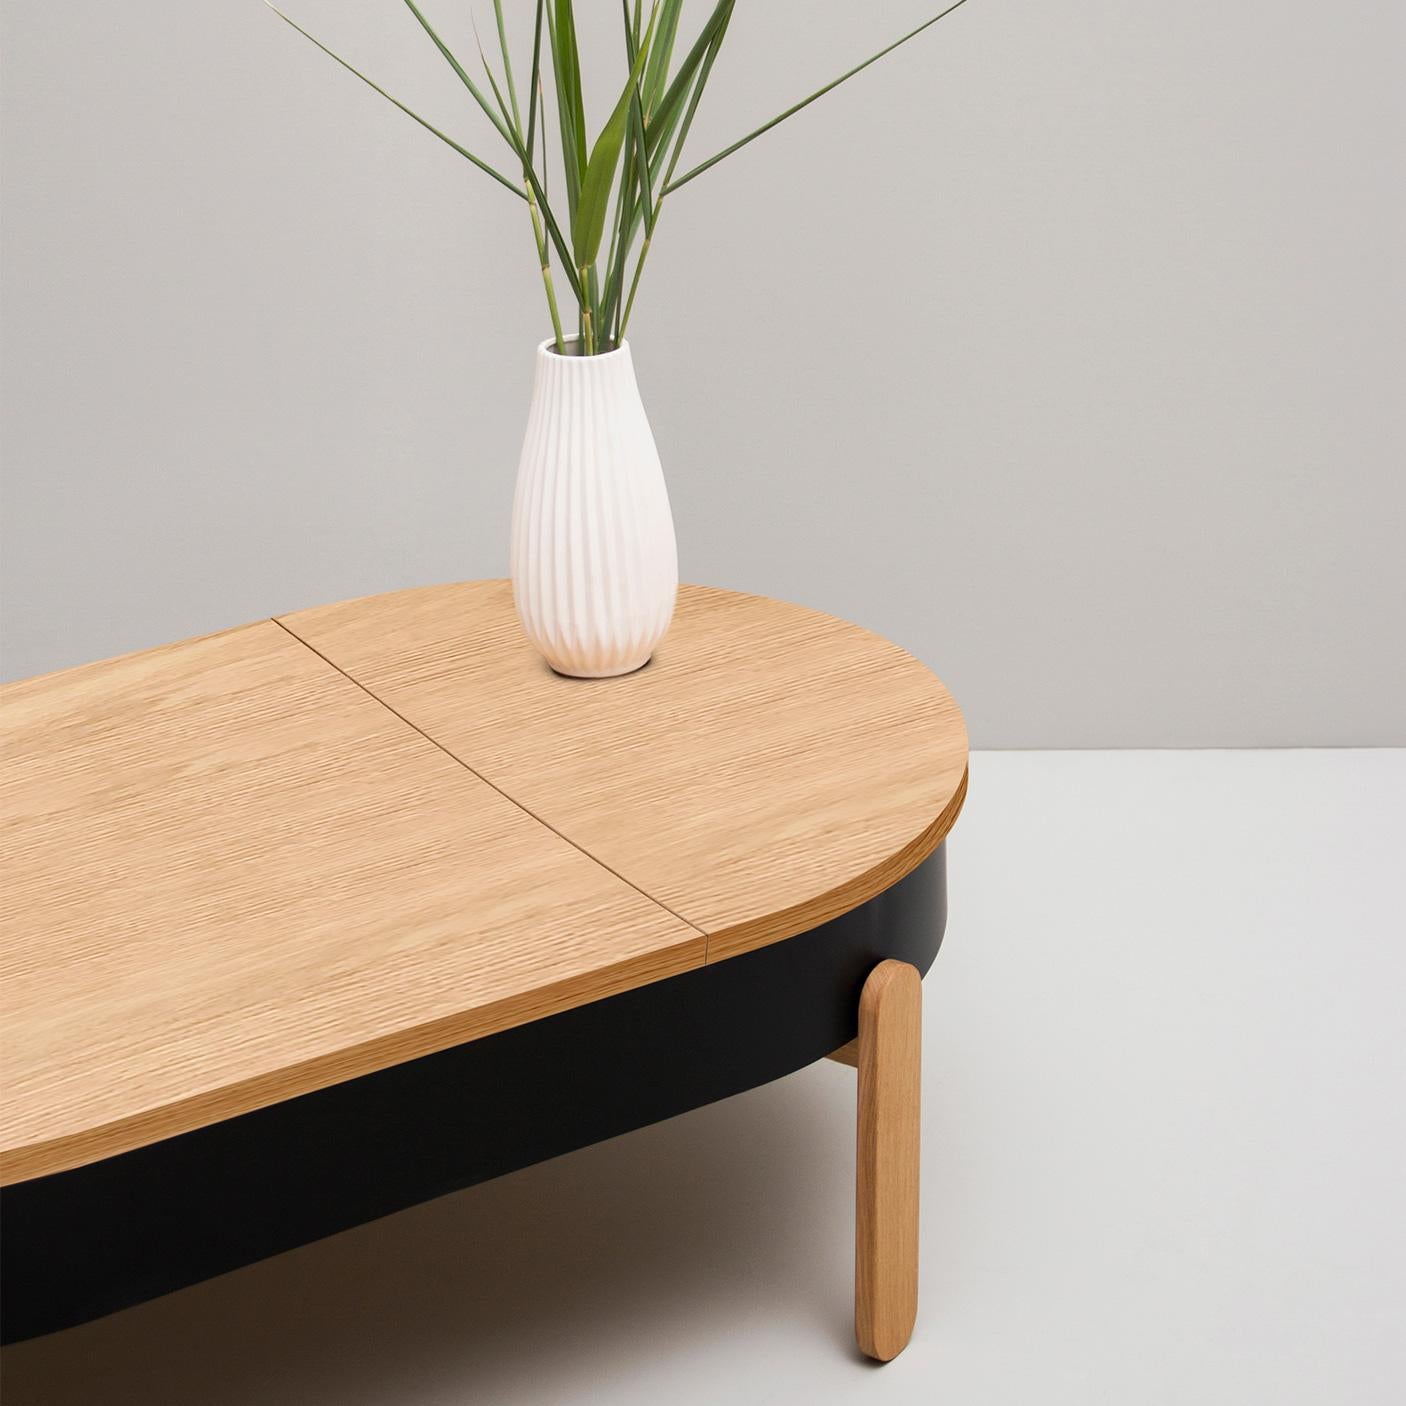 The largest member of the Batea family has a storage space that opens when the tabletop slides. A carefully designed center table with storage that combines craftsmanship and modernity, adapting to the dynamics of each space.

The clean and